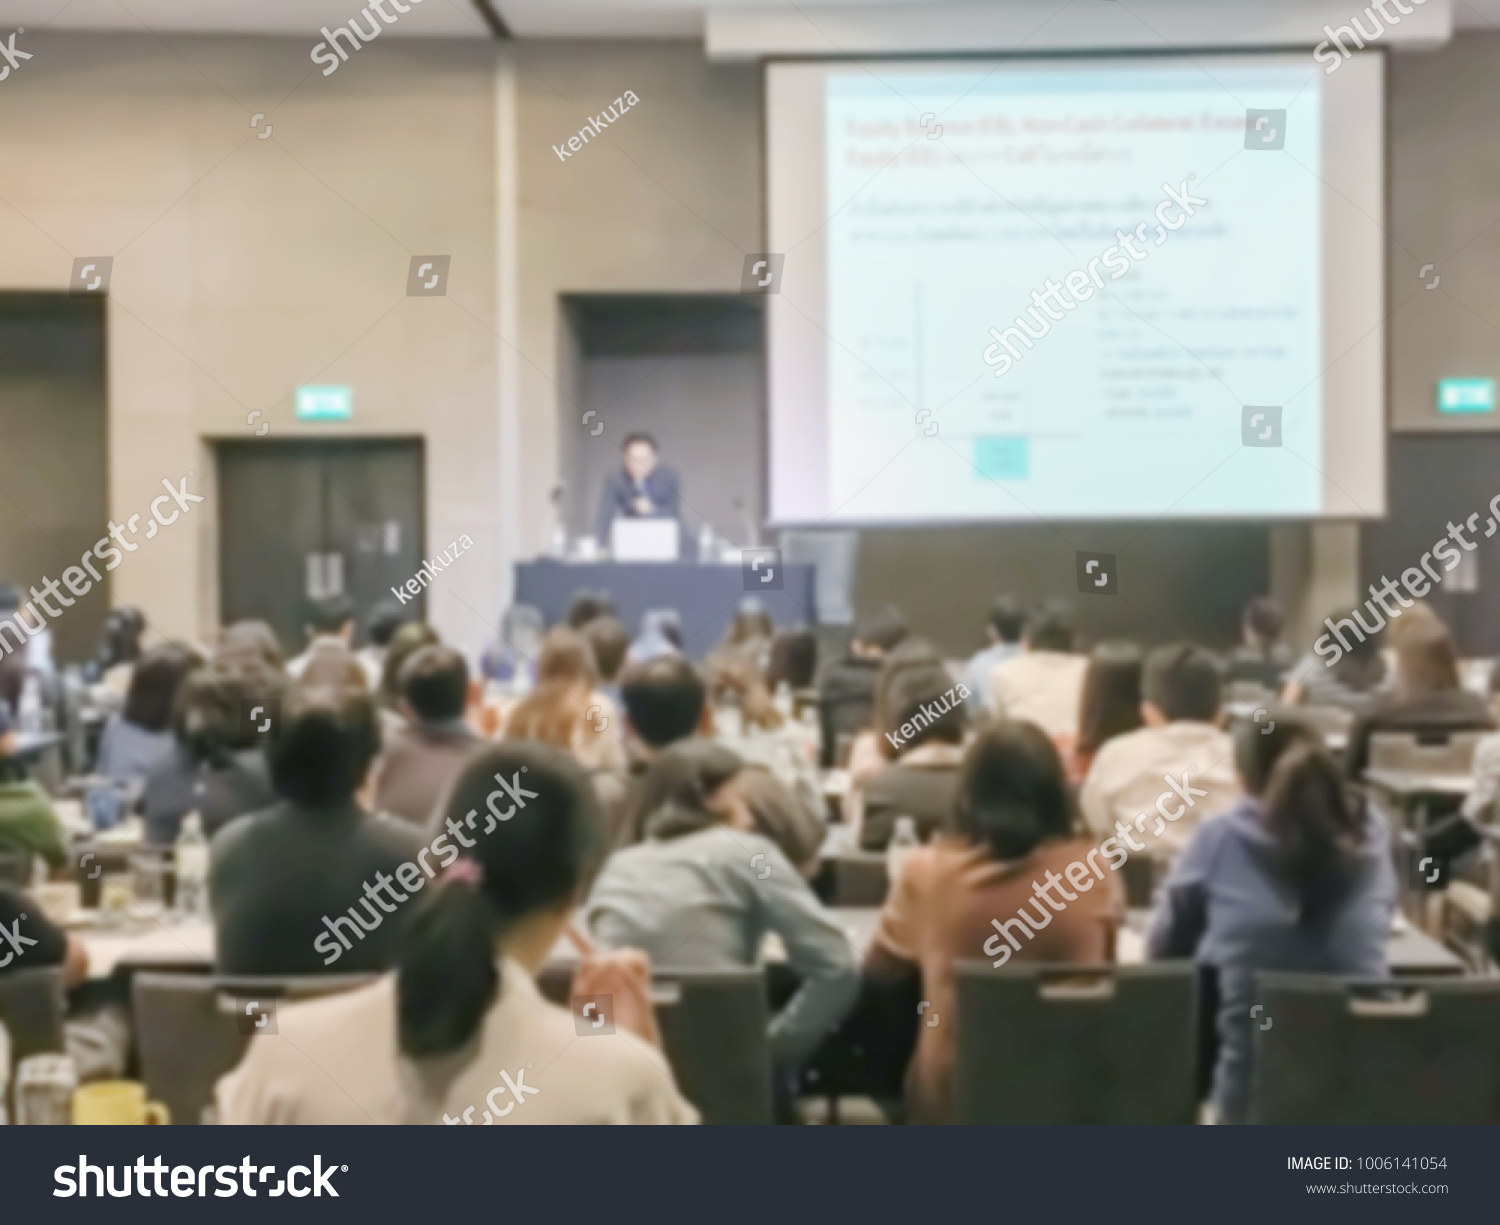 Motion blur of view of seminar with audience in a seminar room #1006141054